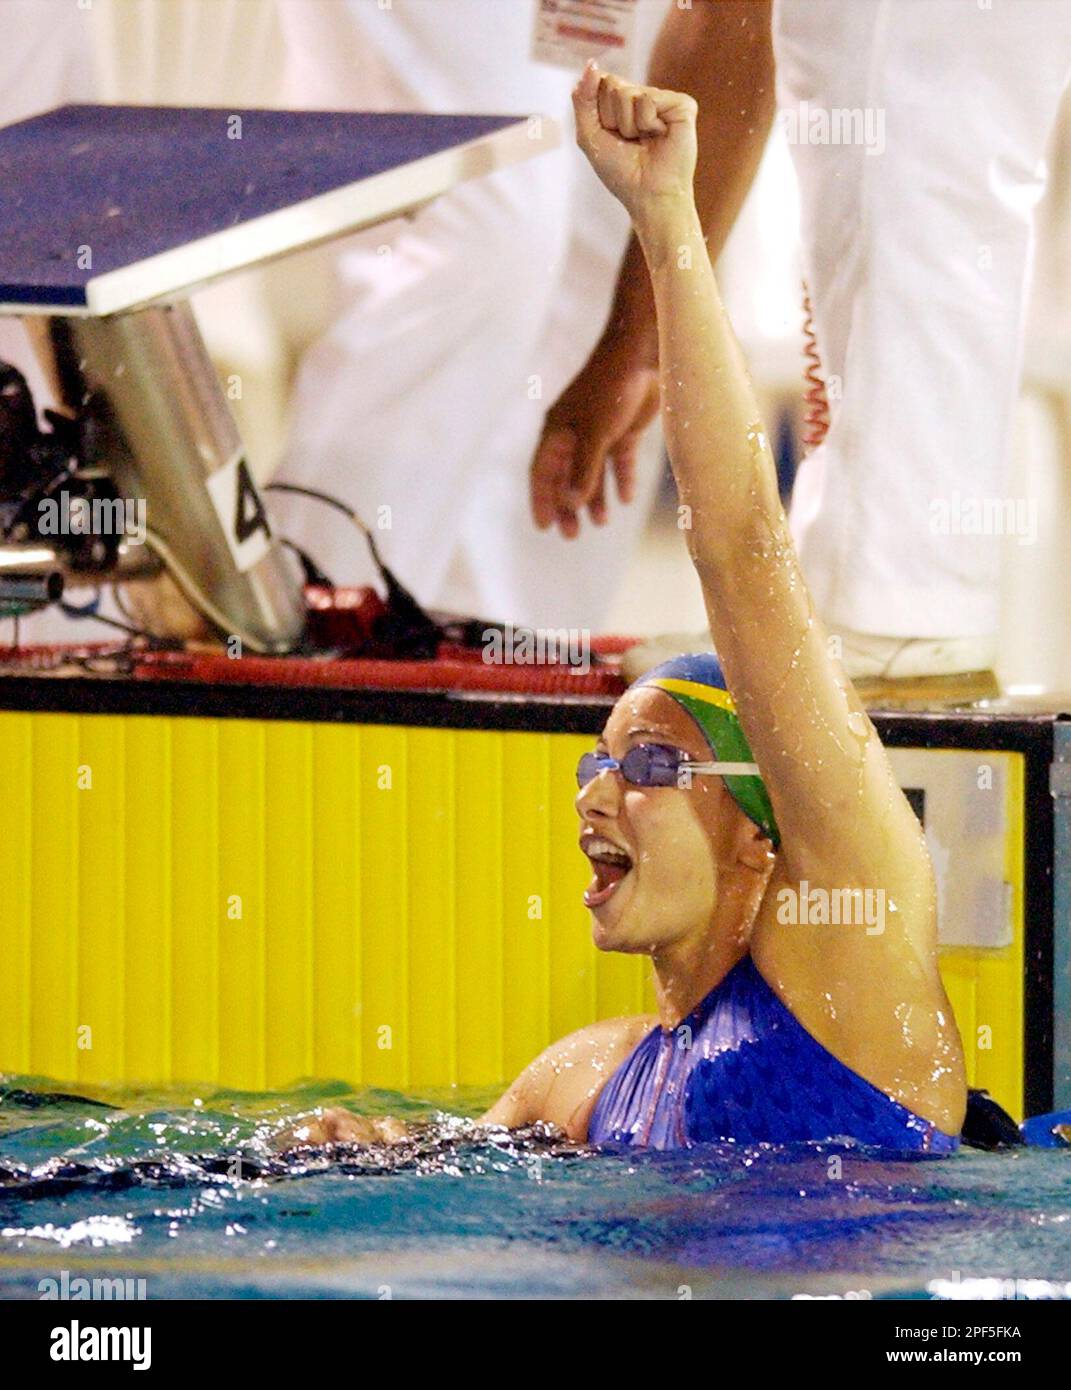 Brazil's Flavia Delaroli reacts after winning the silver medal in the 50 meters freestyle at the Pan American Games on Saturday, Aug. 16, 2003 in Santo Domingo, Dominican Republic. (AP Photo/Joe Cavaretta) Stock Photo